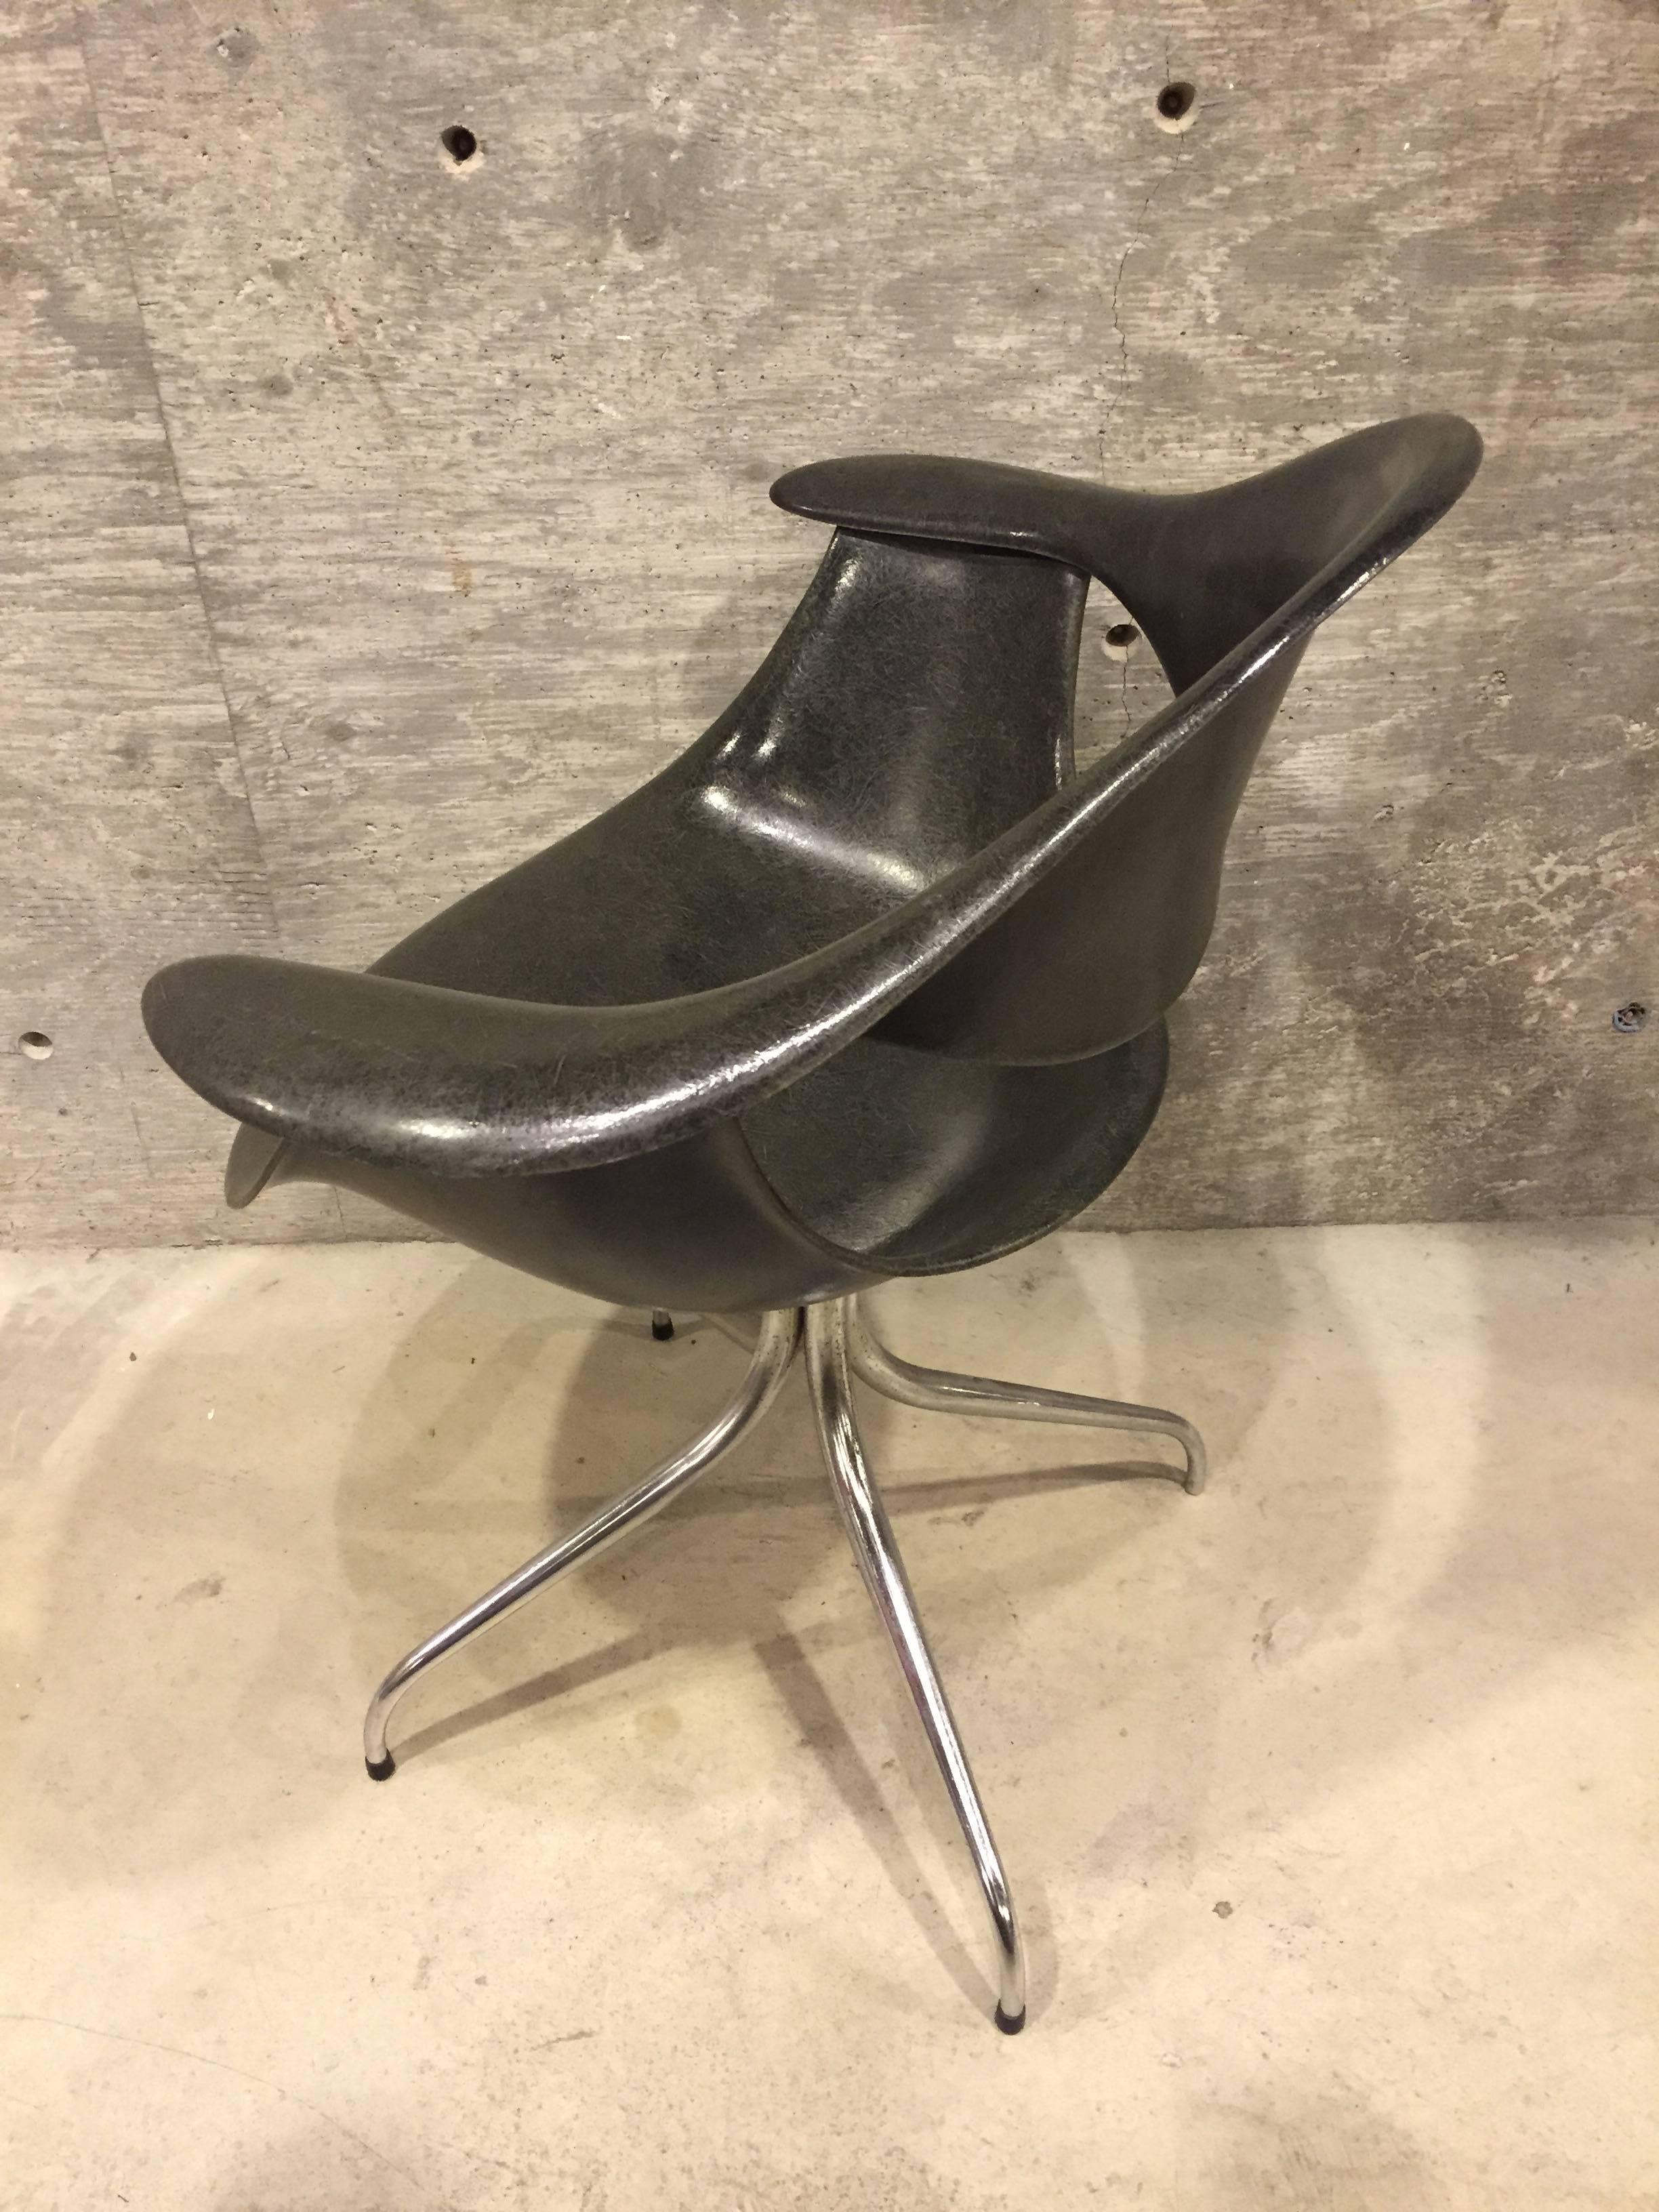 vintage swag leg chair designed by Charles pollock for The George Nelson office 1958
this chair is in great condition and its a dark green/ dark grey color fiberglass .
it is missing one plastic foot boot glide.